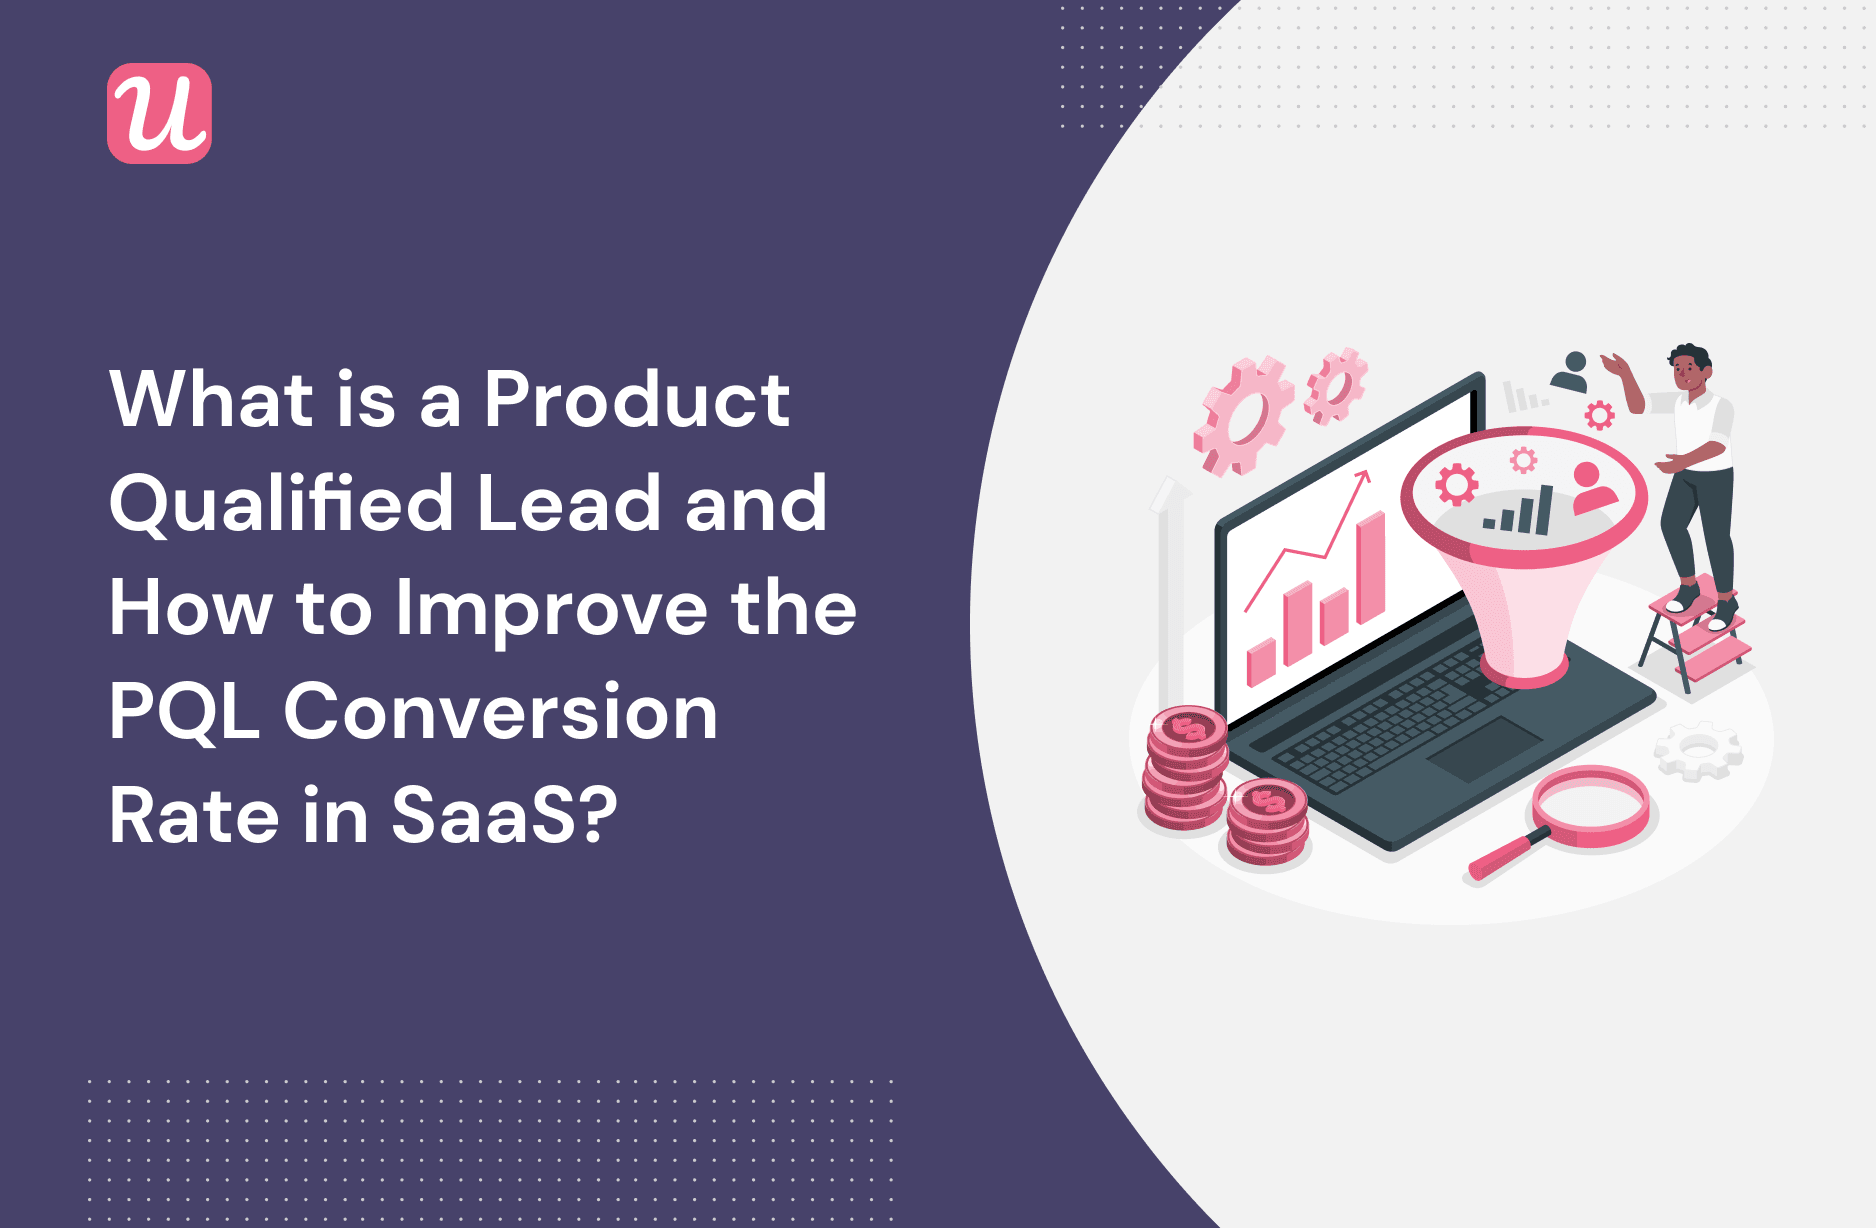 What Is A Product Qualified Lead And How To Improve The PQL Conversion Rate In SaaS?